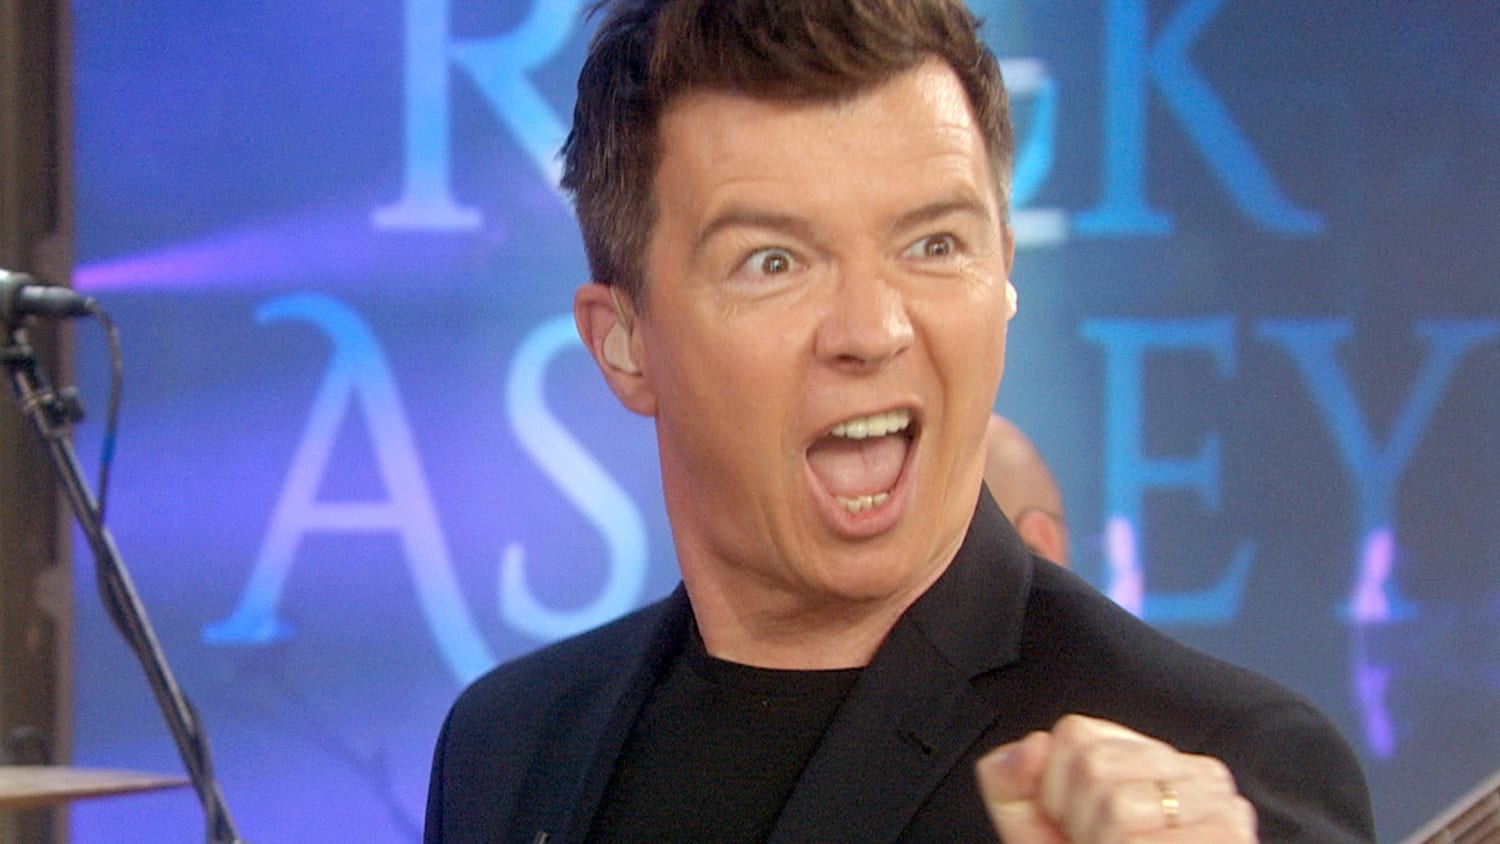 Petition · Making the ultimate Rickroll in  rewind ·